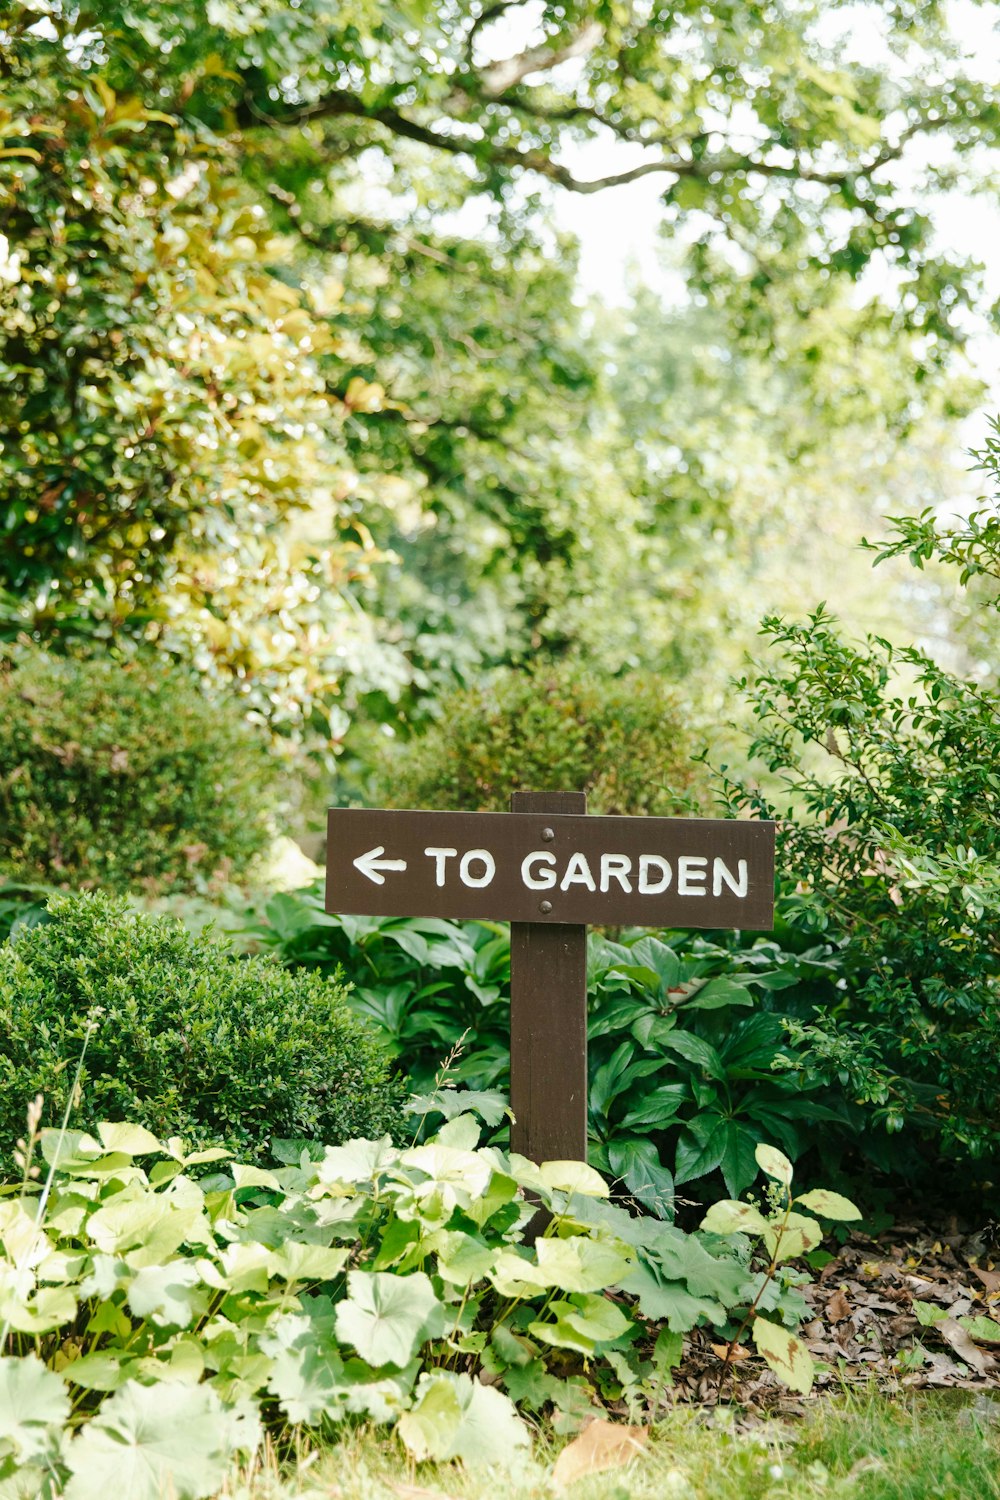 a sign pointing to the right in a garden